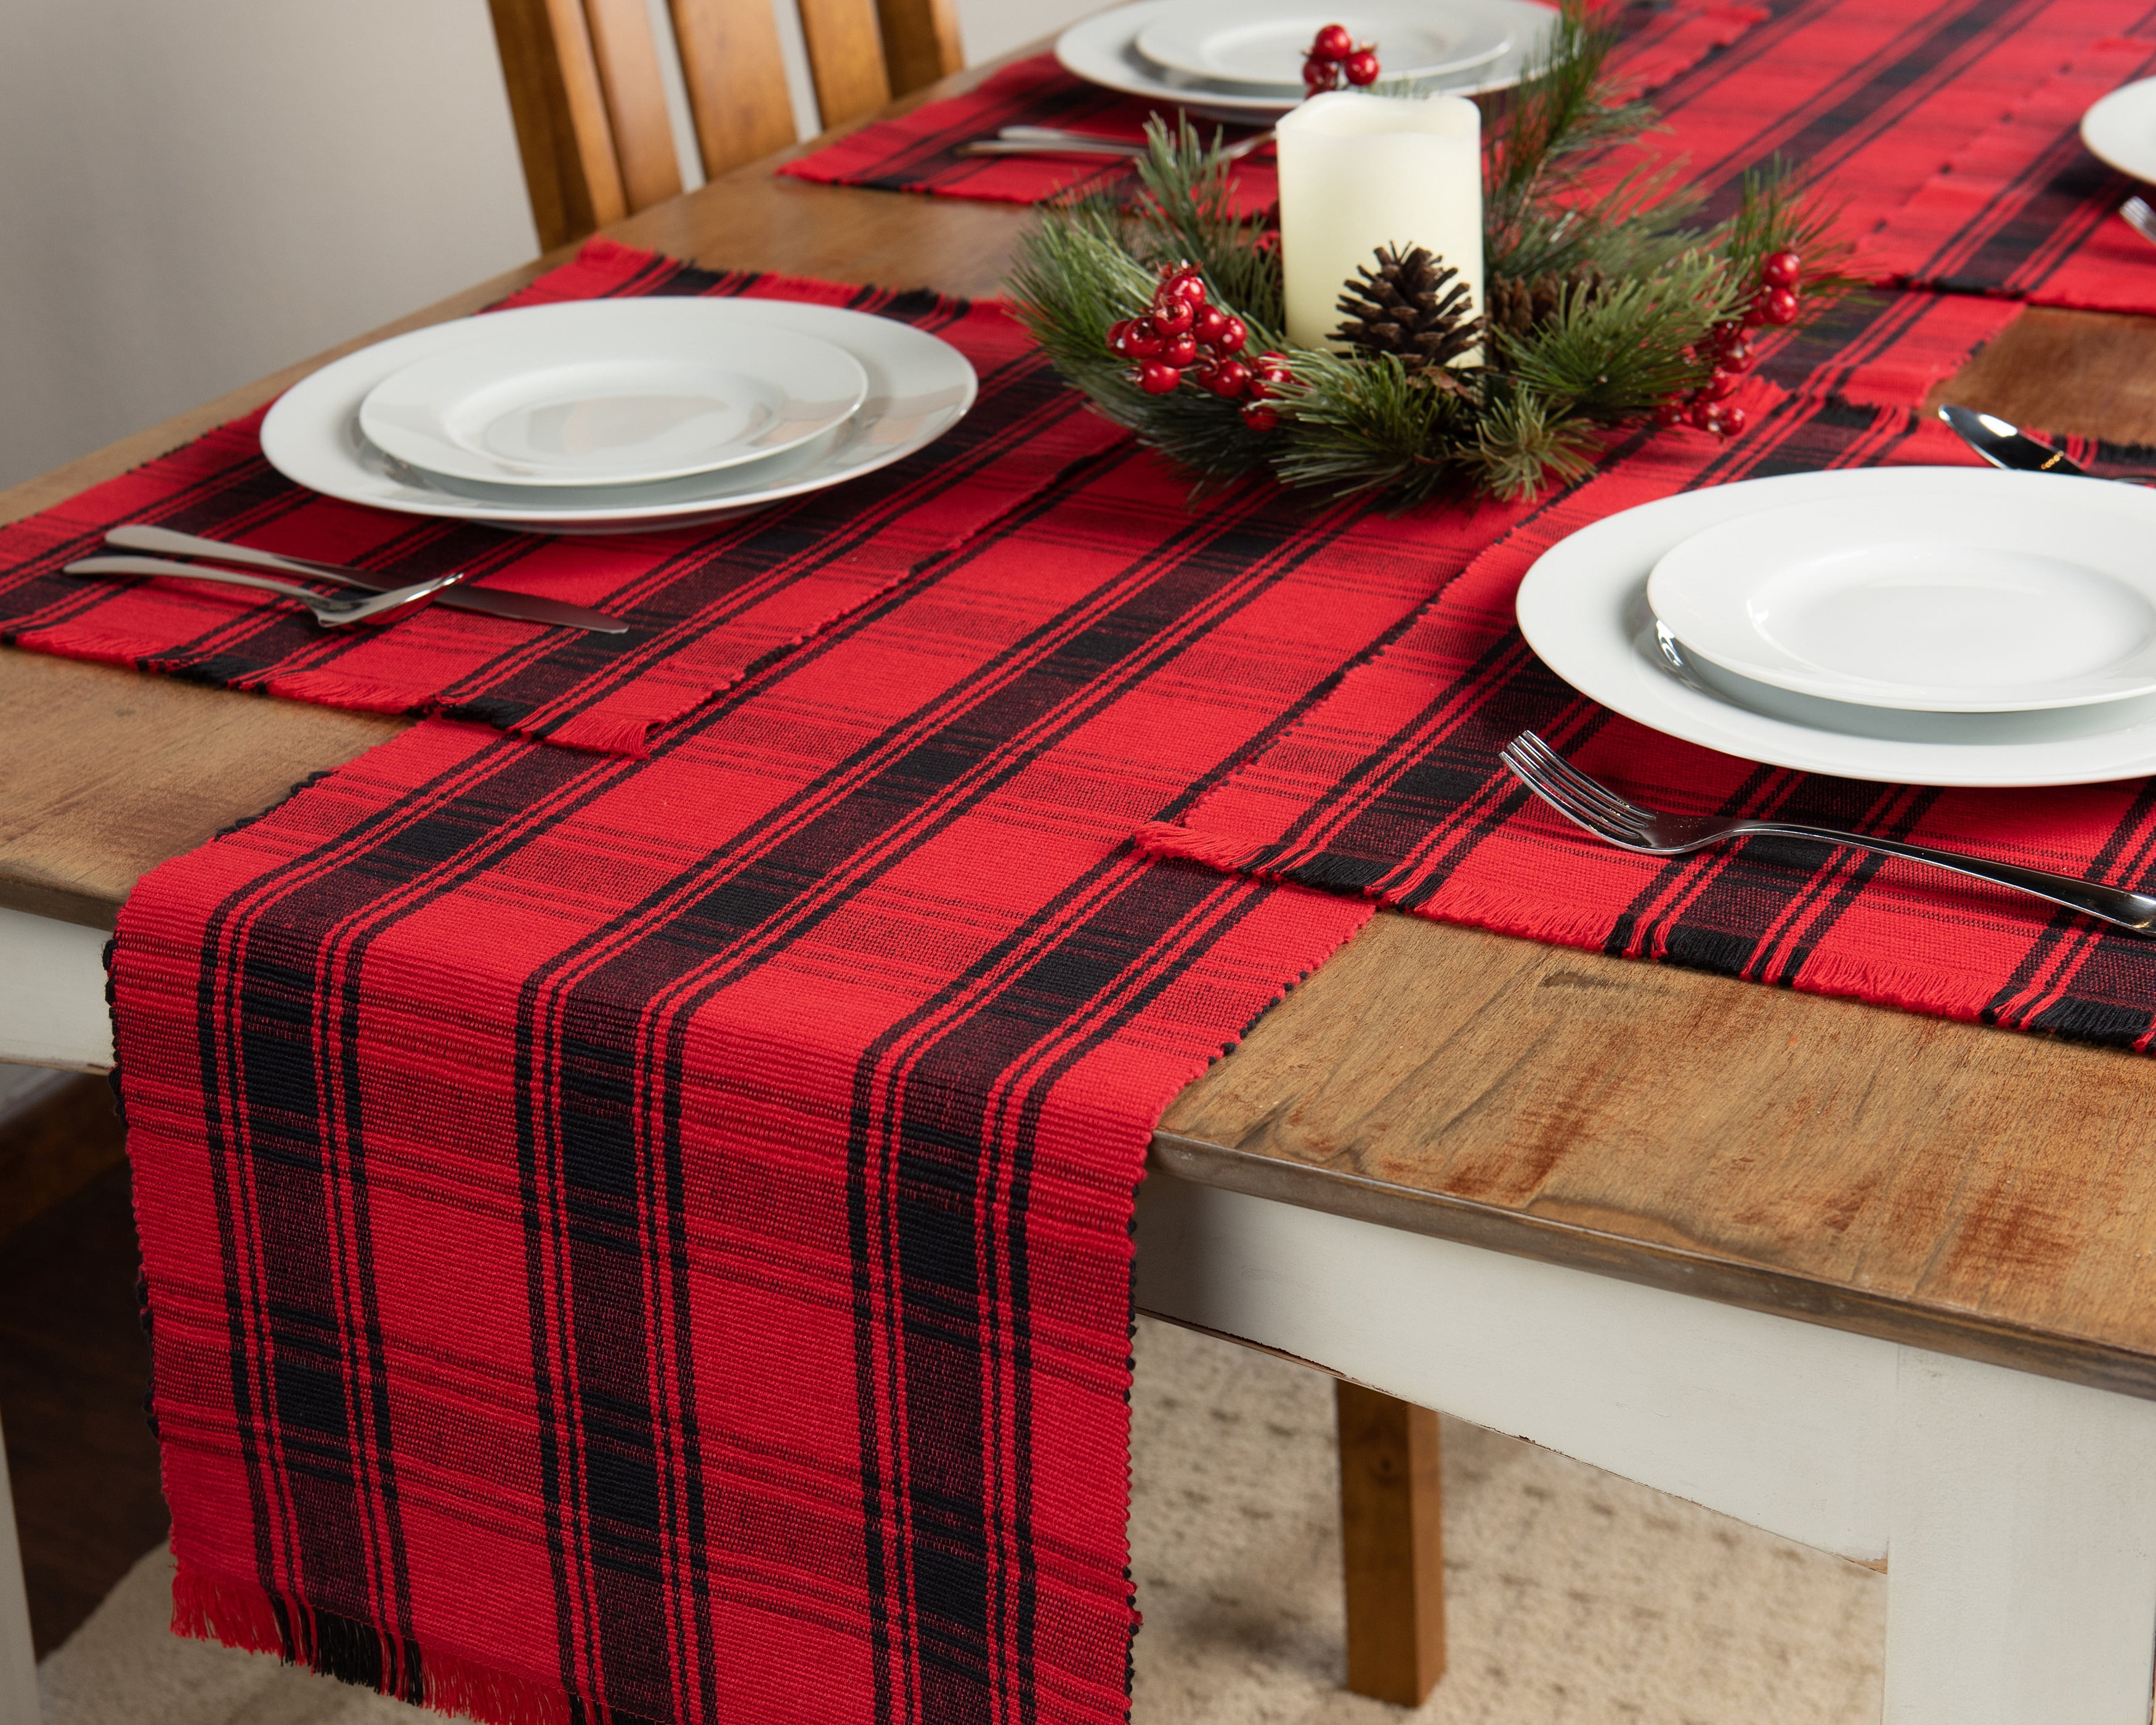 Beautiful colorful Table runner tablecloth festive table runner 12 inches wide by 72 inches long